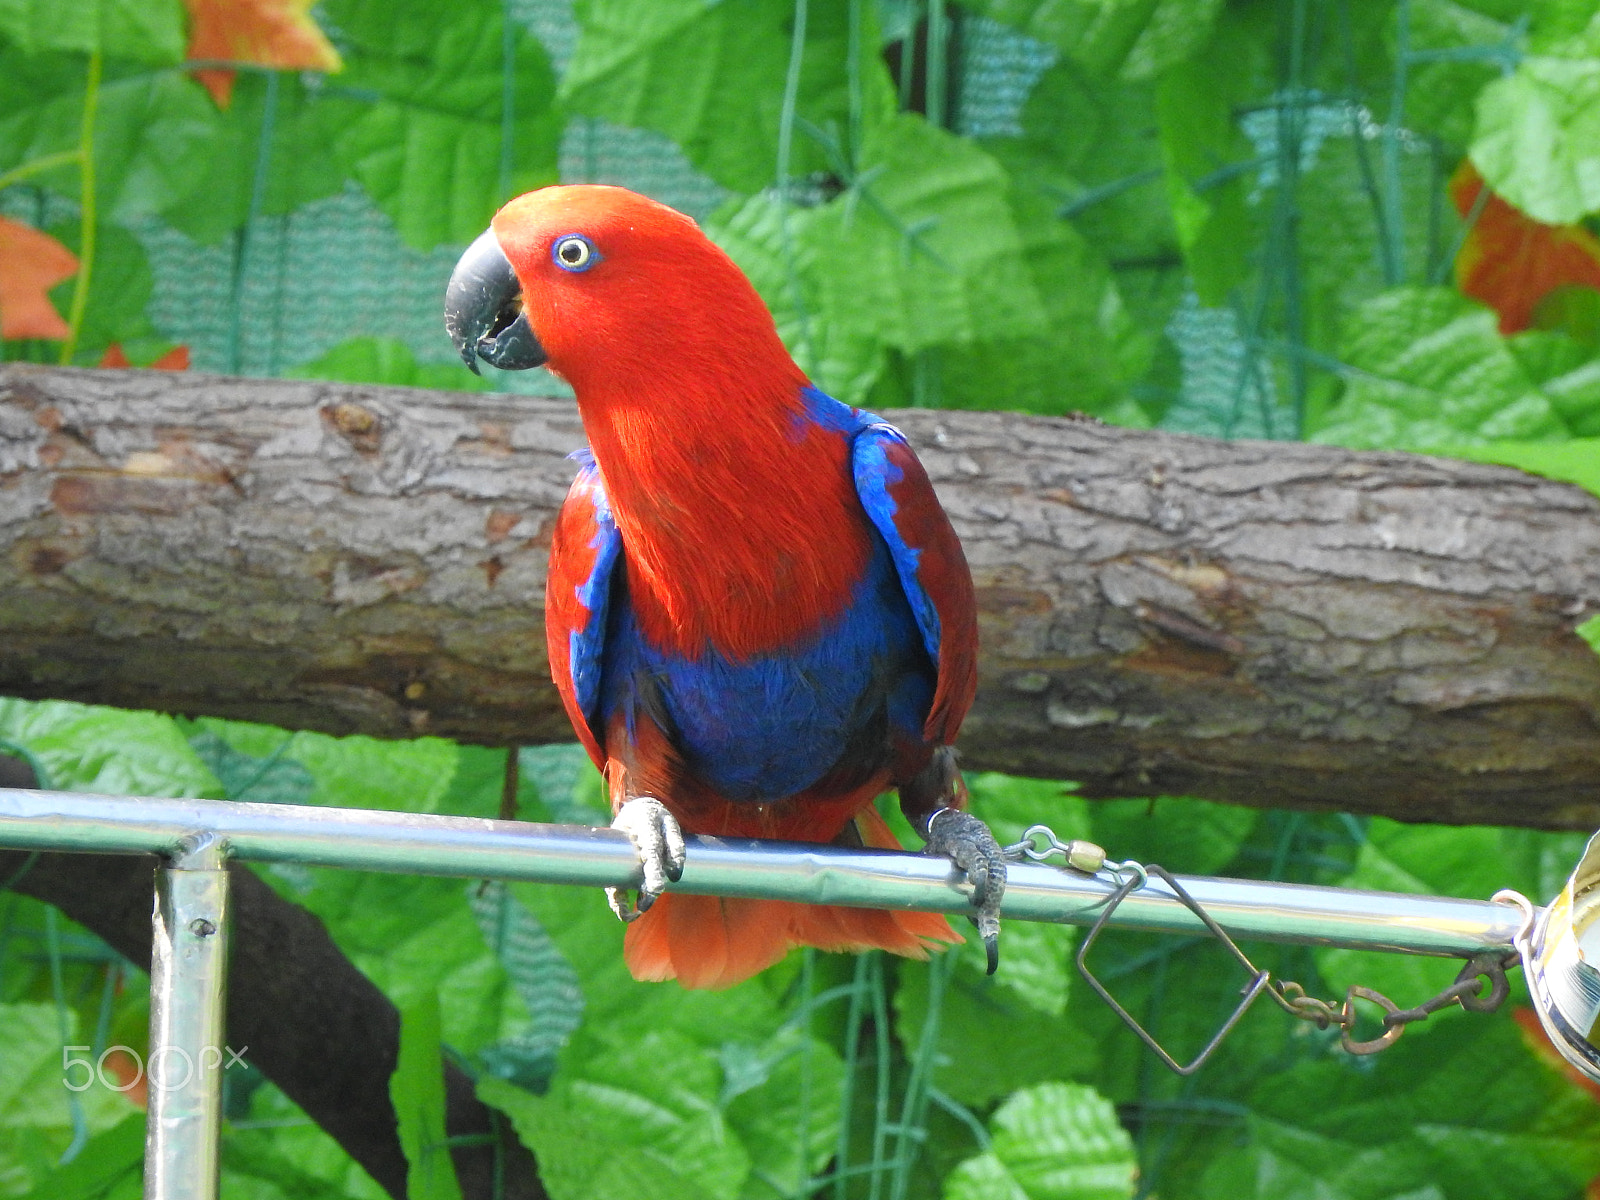 Nikon COOLPIX P900s sample photo. A red parrot photography